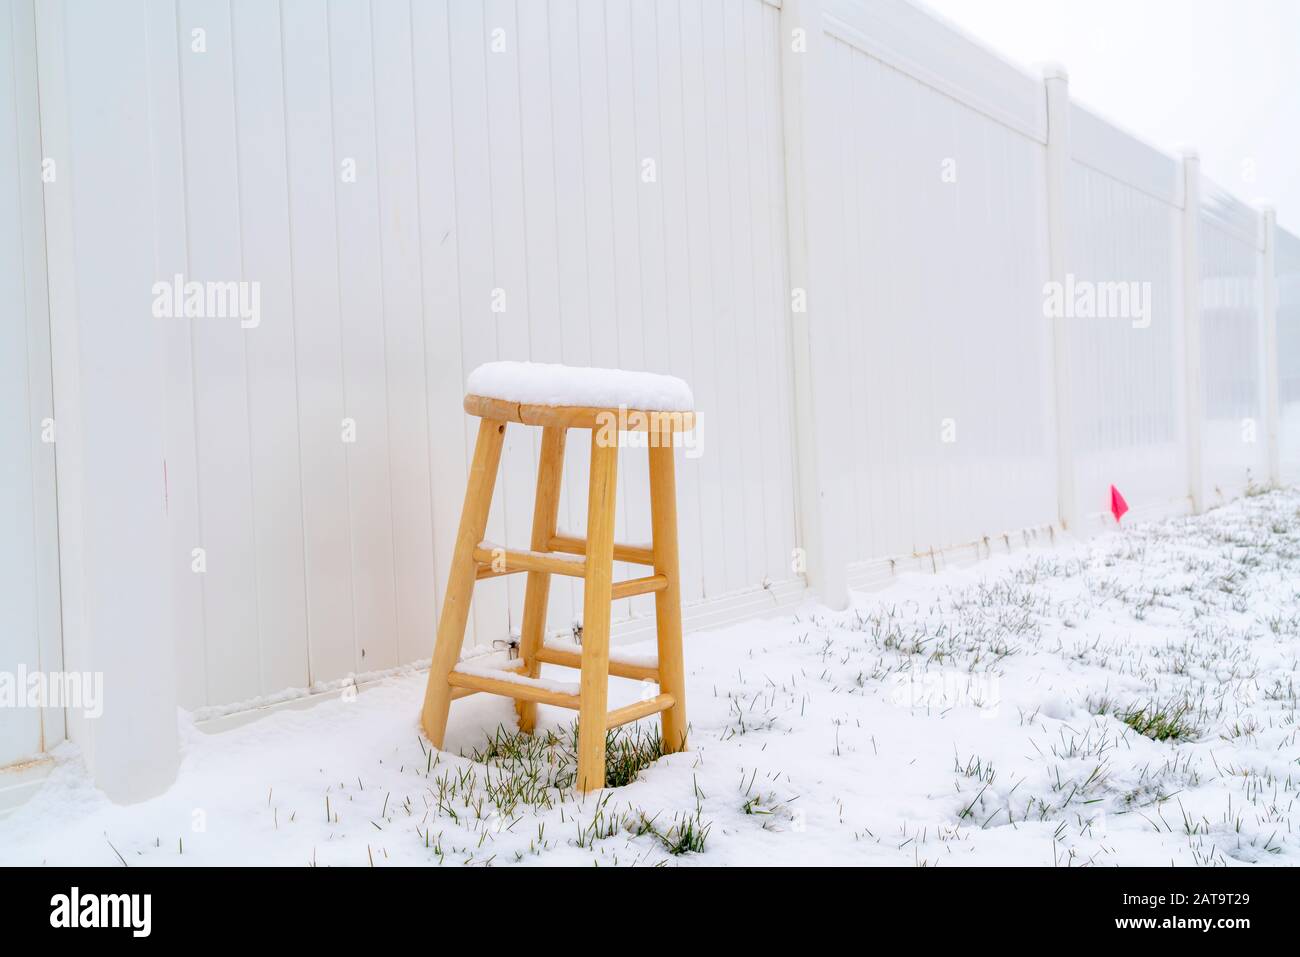 Wooden stool on snow covered ground in winter against white wood fence Stock Photo